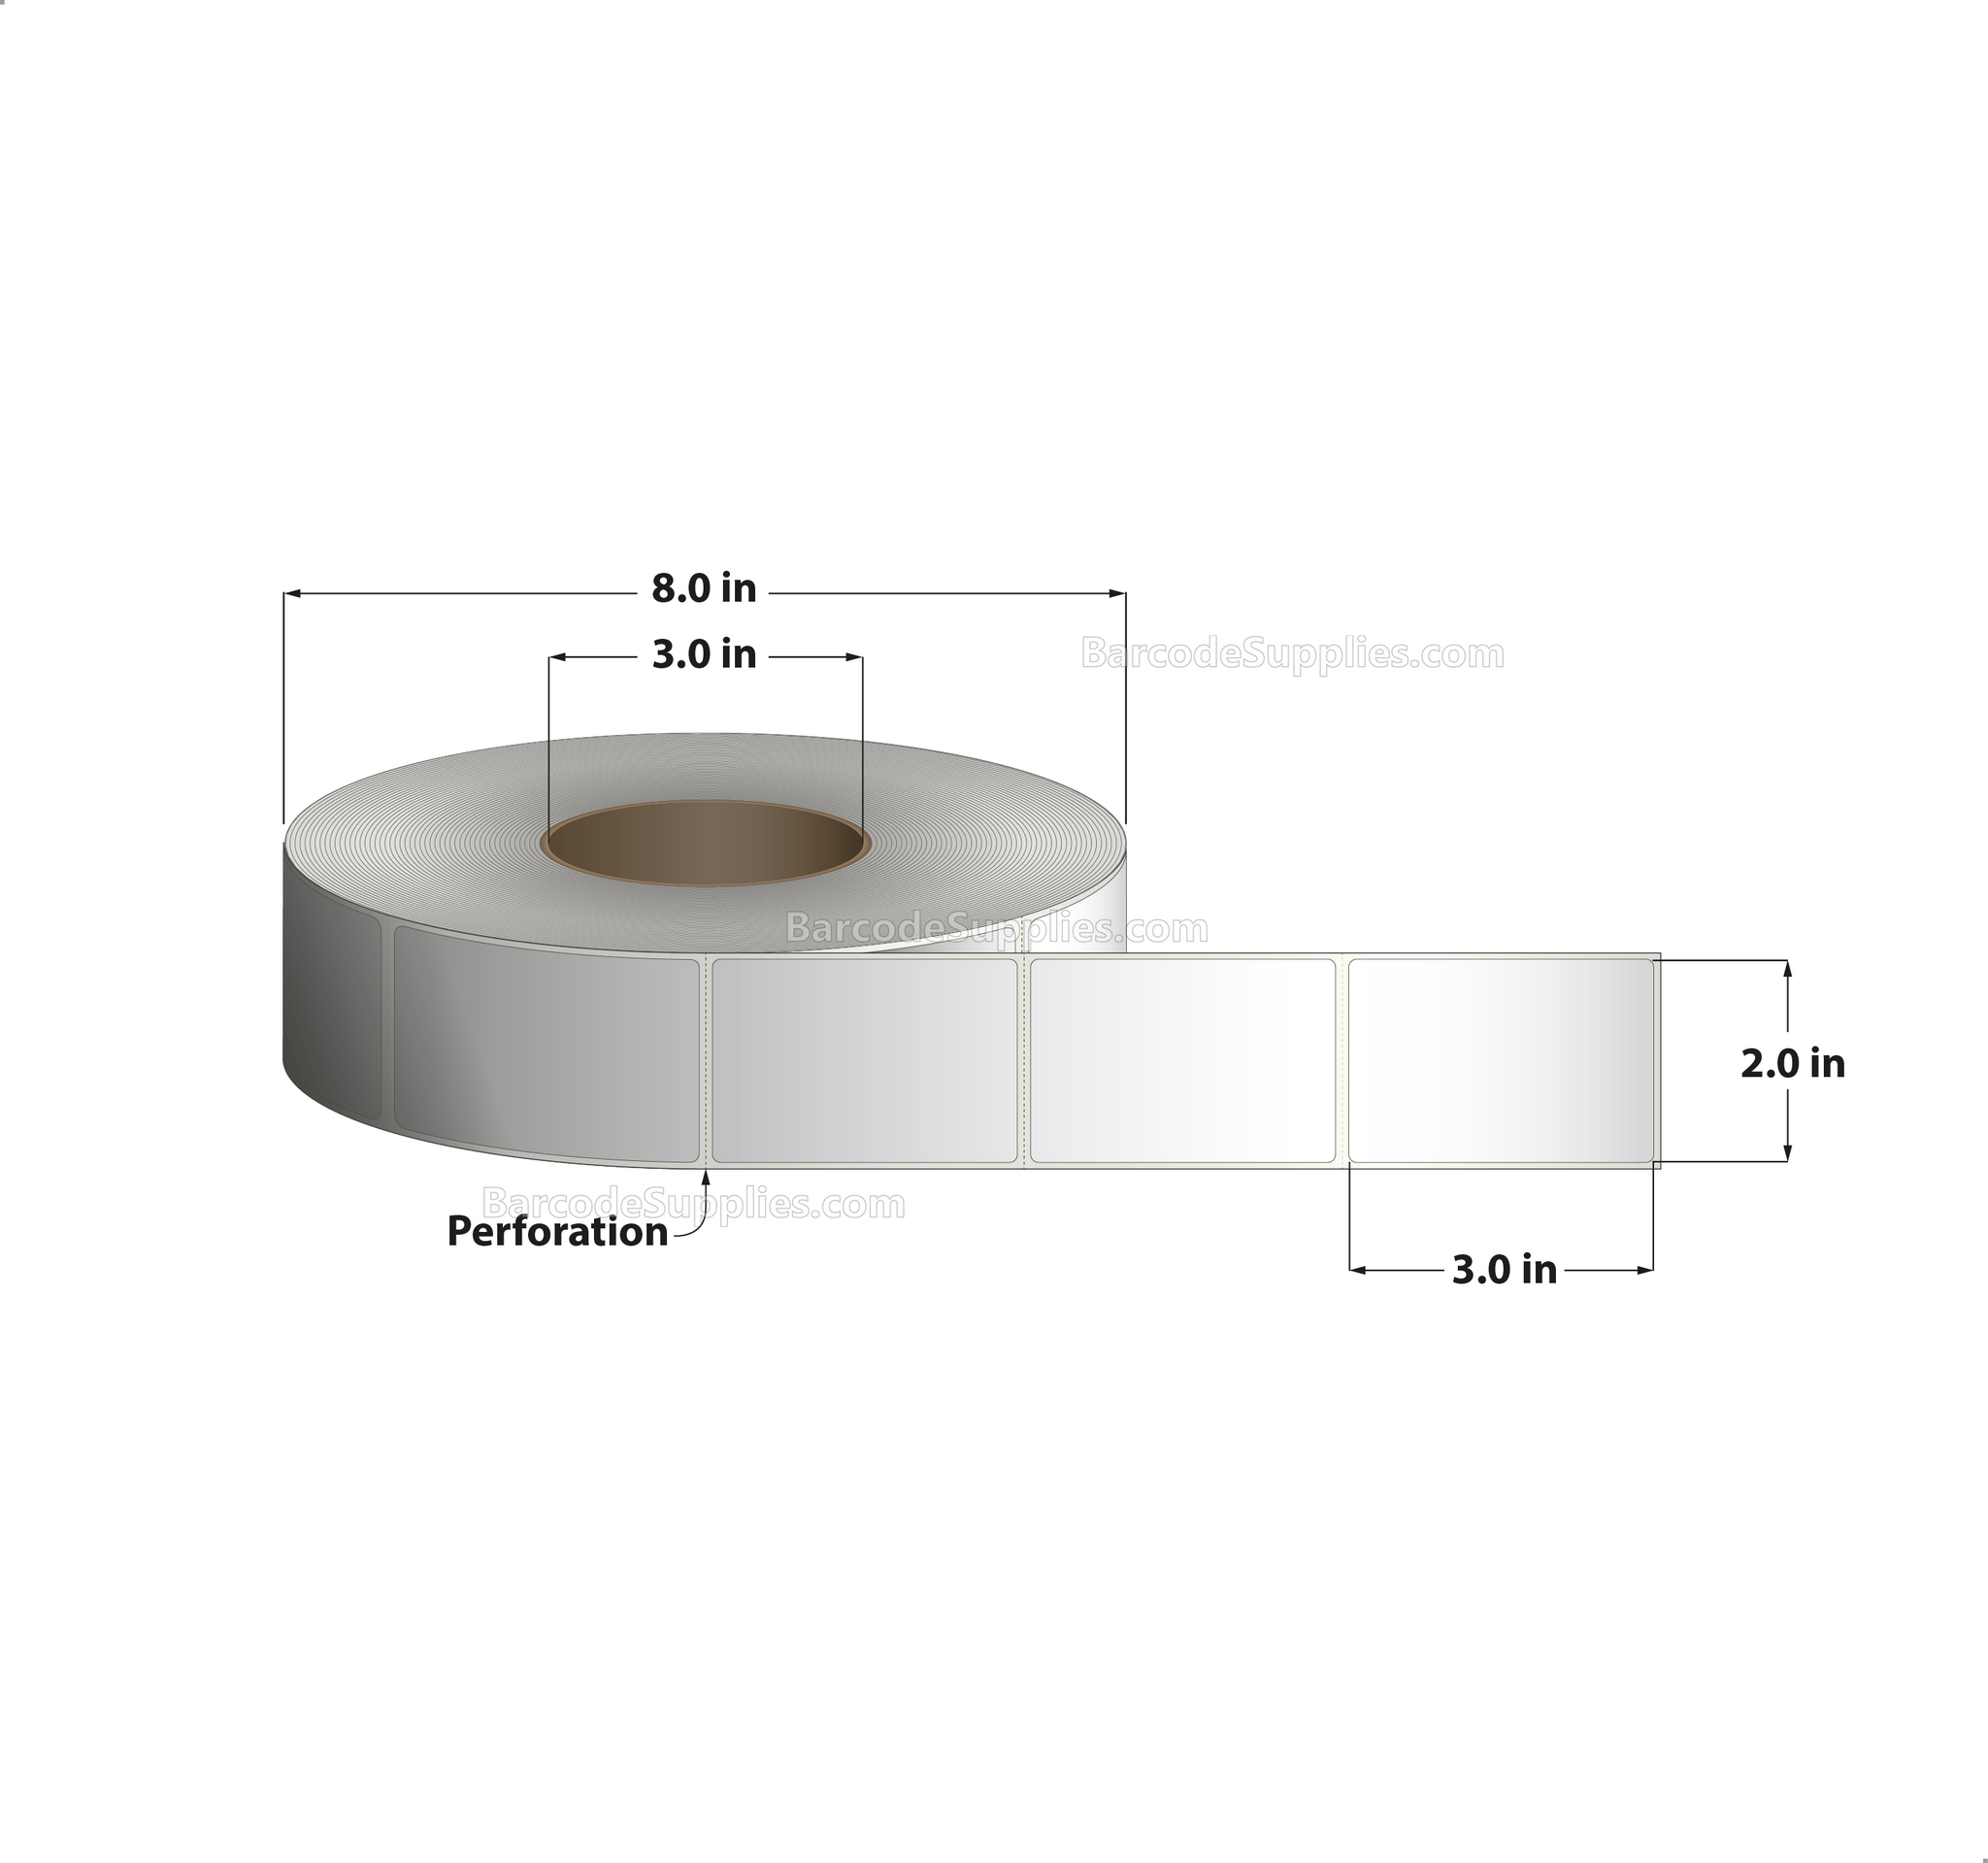 2 x 3 Direct Thermal White Labels With Acrylic Adhesive - Perforated - 1900 Labels Per Roll - Carton Of 8 Rolls - 15200 Labels Total - MPN: RD-2-3-1900-3 - BarcodeSource, Inc.